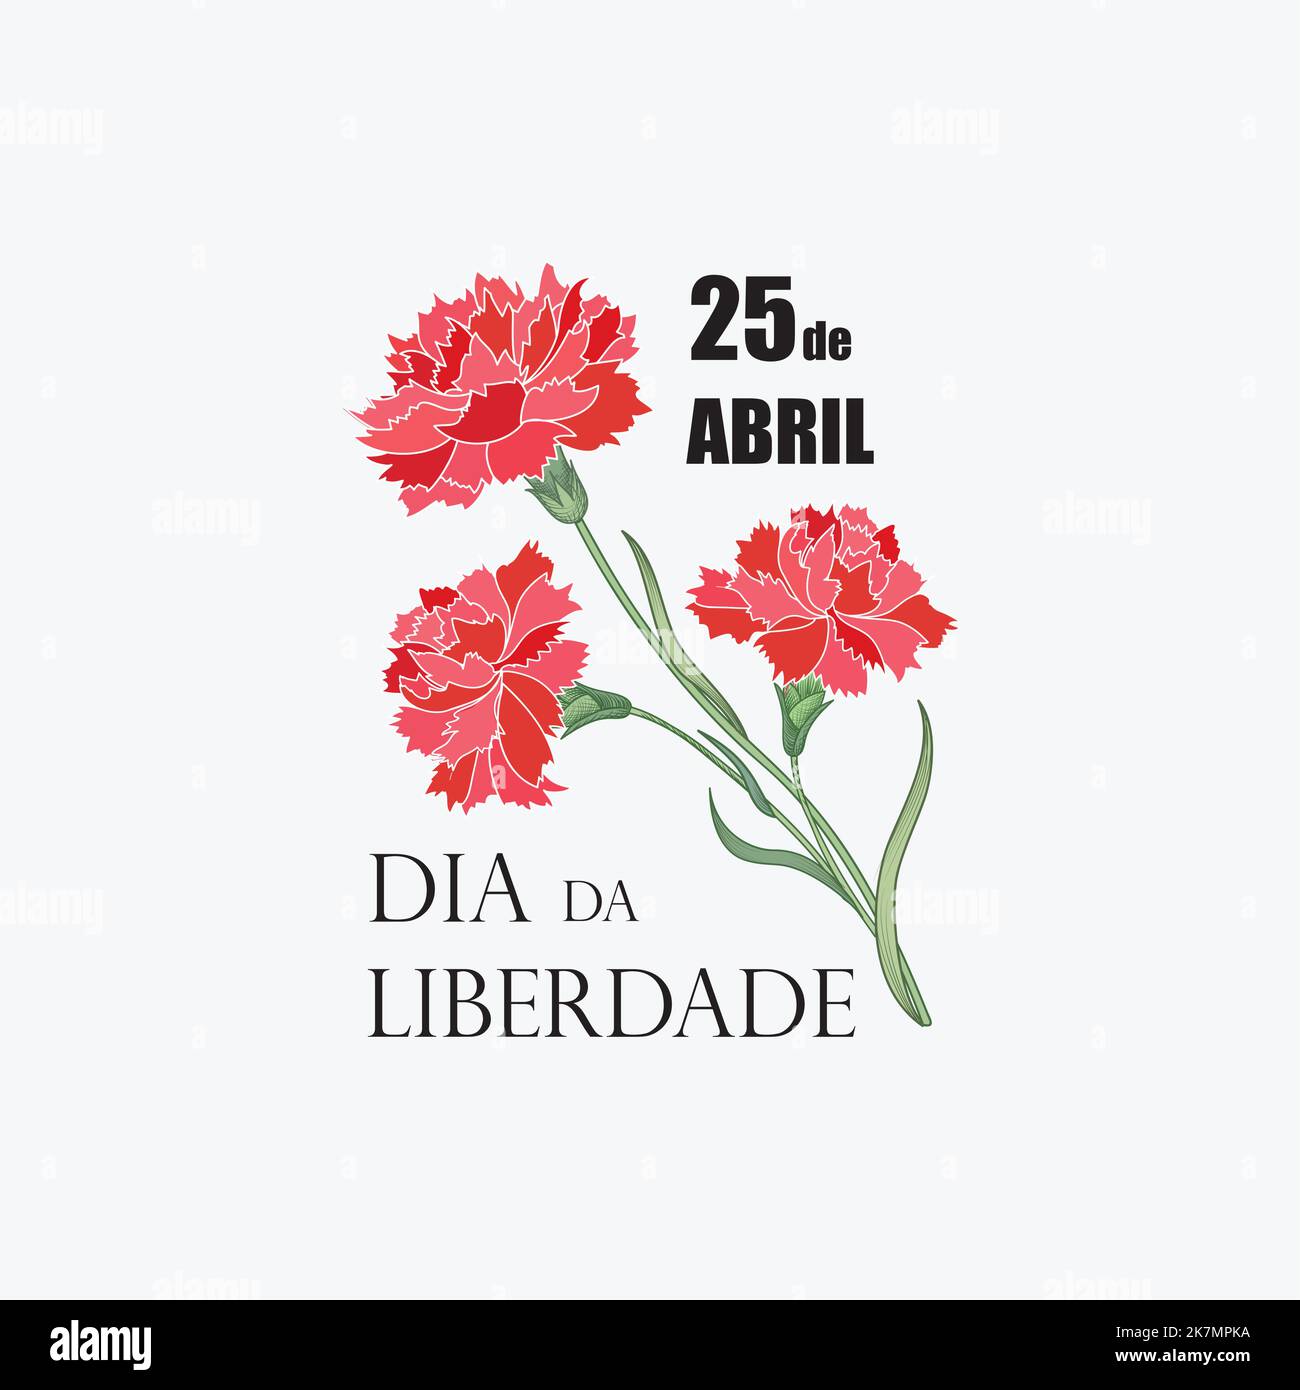 Portugal Freedom Day. 25 April Nacional Holiday of Carnation Revolution. Portuguese holiday vector illustration. Stock Vector